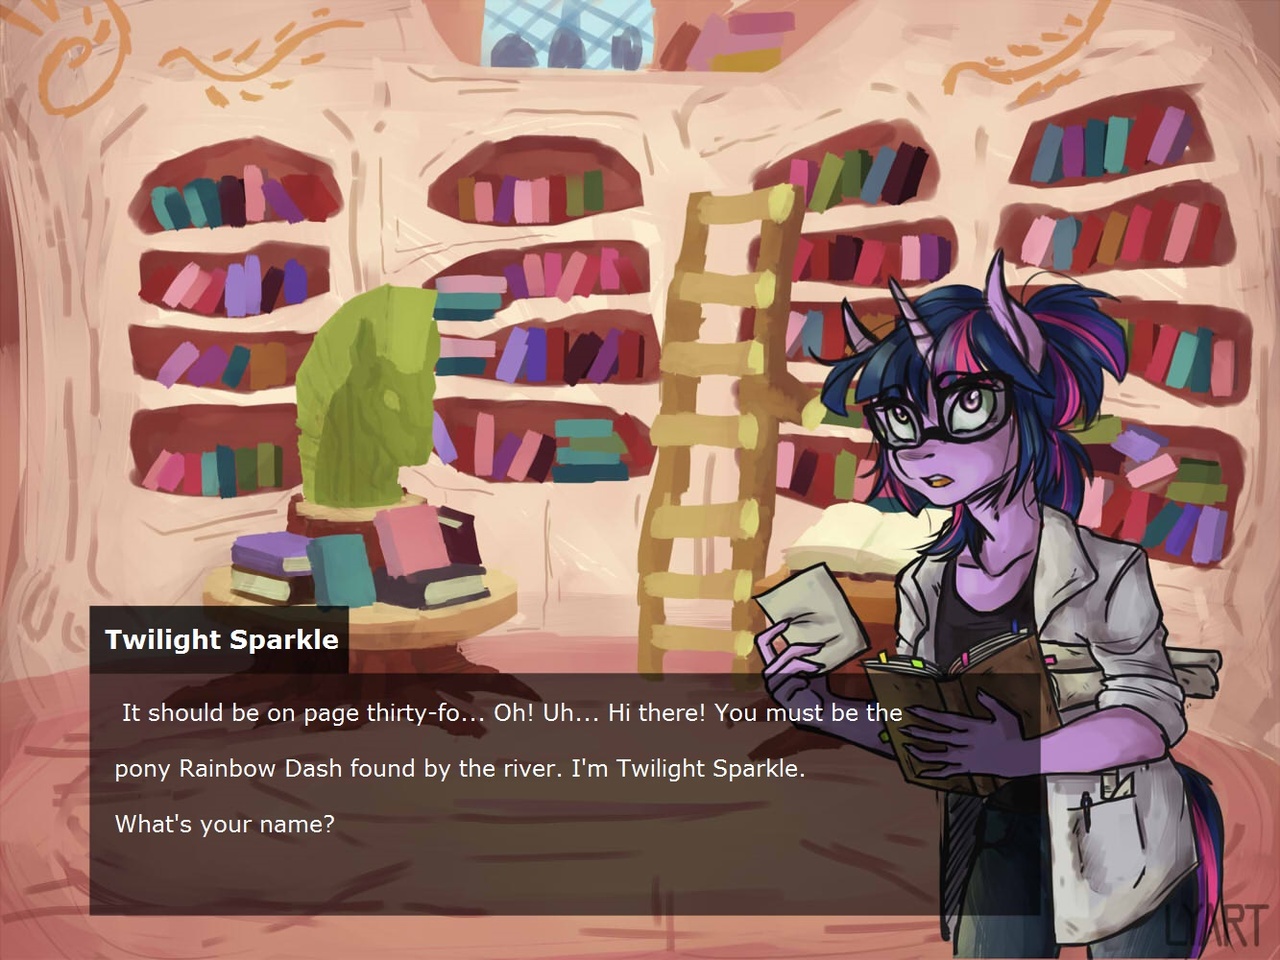 Role playing dating sims